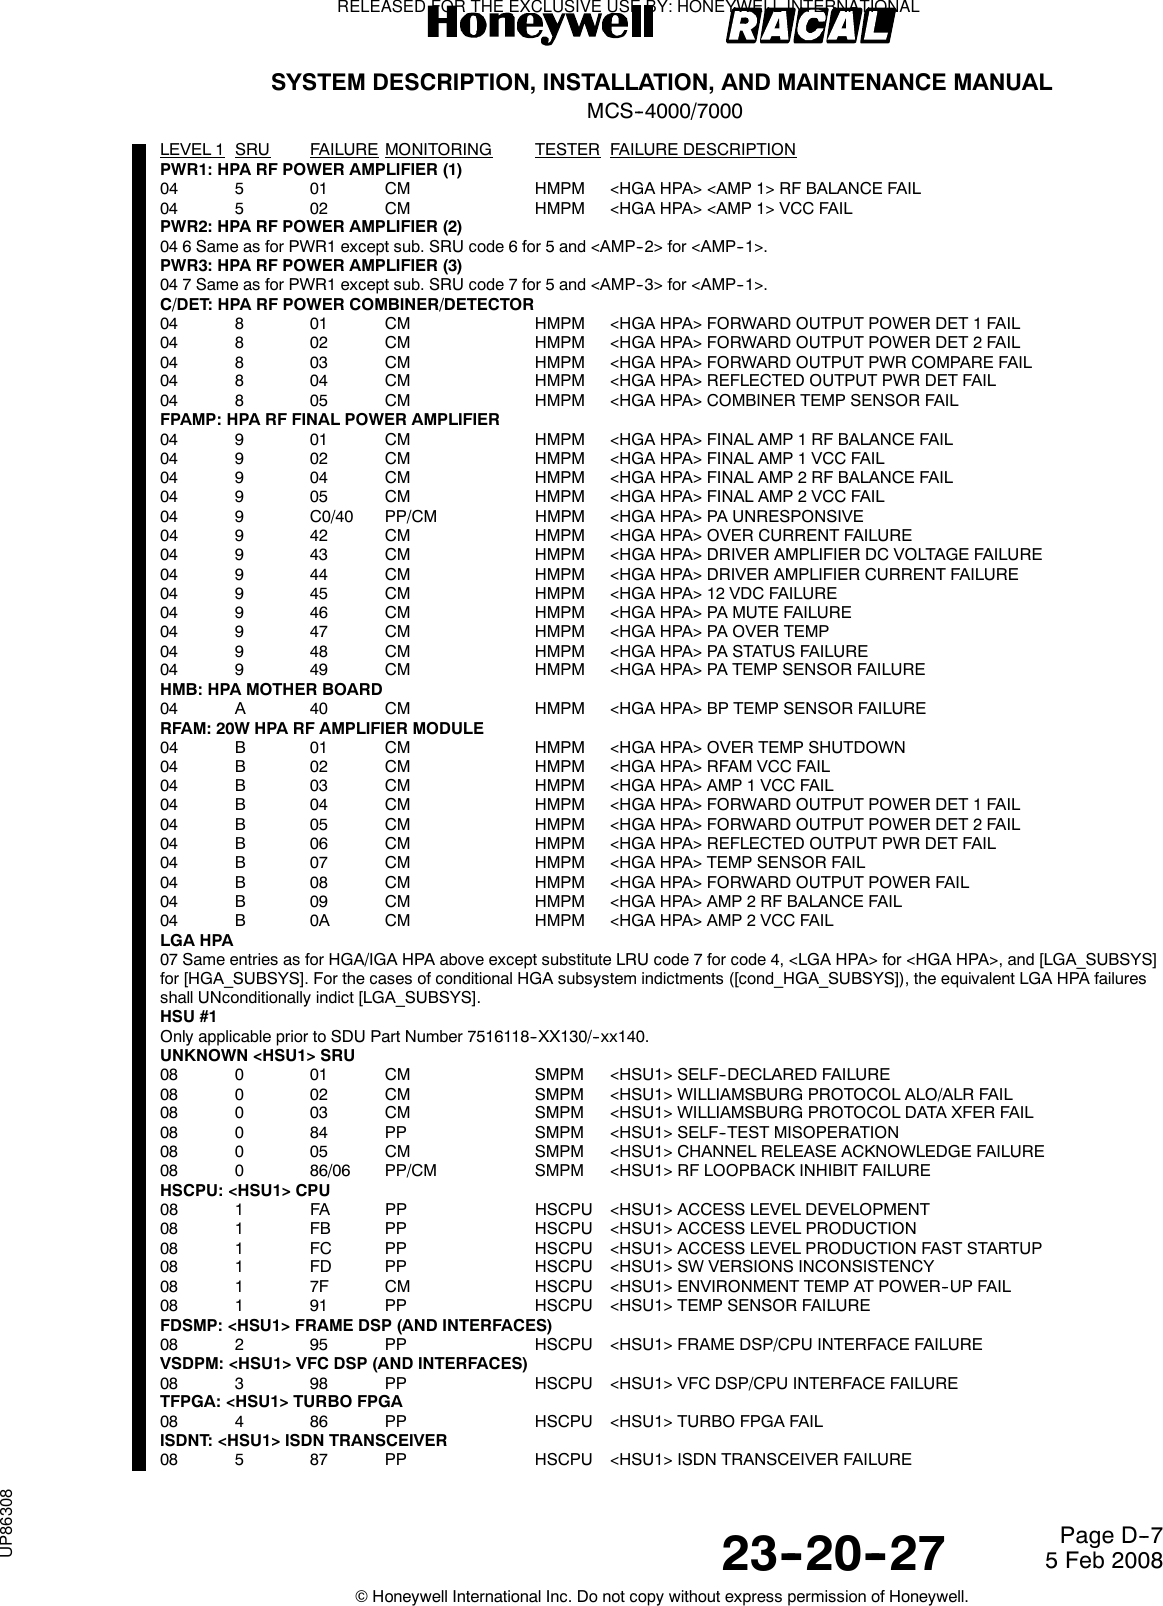 SYSTEM DESCRIPTION, INSTALLATION, AND MAINTENANCE MANUALMCS--4000/700023--20--27 5 Feb 2008©Honeywell International Inc. Do not copy without express permission of Honeywell.Page D--7LEVEL 1 SRU FAILURE MONITORING TESTER FAILURE DESCRIPTIONPWR1: HPA RF POWER AMPLIFIER (1)04 5 01 CM HMPM &lt;HGA HPA&gt; &lt;AMP 1&gt; RF BALANCE FAIL04 5 02 CM HMPM &lt;HGAHPA&gt;&lt;AMP1&gt;VCCFAILPWR2: HPA RF POWER AMPLIFIER (2)04 6 Same as for PWR1 except sub. SRU code 6 for 5 and &lt;AMP--2&gt; for &lt;AMP--1&gt;.PWR3: HPA RF POWER AMPLIFIER (3)04 7 Same as for PWR1 except sub. SRU code 7 for 5 and &lt;AMP--3&gt; for &lt;AMP--1&gt;.C/DET: HPA RF POWER COMBINER/DETECTOR04 8 01 CM HMPM &lt;HGA HPA&gt; FORWARD OUTPUT POWER DET 1 FAIL04 8 02 CM HMPM &lt;HGA HPA&gt; FORWARD OUTPUT POWER DET 2 FAIL04 8 03 CM HMPM &lt;HGA HPA&gt; FORWARD OUTPUT PWR COMPARE FAIL04 8 04 CM HMPM &lt;HGA HPA&gt; REFLECTED OUTPUT PWR DET FAIL04 8 05 CM HMPM &lt;HGA HPA&gt; COMBINER TEMP SENSOR FAILFPAMP: HPA RF FINAL POWER AMPLIFIER04 9 01 CM HMPM &lt;HGA HPA&gt; FINAL AMP 1 RF BALANCE FAIL04 9 02 CM HMPM &lt;HGA HPA&gt; FINAL AMP 1 VCC FAIL04 9 04 CM HMPM &lt;HGA HPA&gt; FINAL AMP 2 RF BALANCE FAIL04 9 05 CM HMPM &lt;HGA HPA&gt; FINAL AMP 2 VCC FAIL04 9 C0/40 PP/CM HMPM &lt;HGA HPA&gt; PA UNRESPONSIVE04 9 42 CM HMPM &lt;HGA HPA&gt; OVER CURRENT FAILURE04 9 43 CM HMPM &lt;HGA HPA&gt; DRIVER AMPLIFIER DC VOLTAGE FAILURE04 9 44 CM HMPM &lt;HGA HPA&gt; DRIVER AMPLIFIER CURRENT FAILURE04 9 45 CM HMPM &lt;HGA HPA&gt; 12 VDC FAILURE04 9 46 CM HMPM &lt;HGA HPA&gt; PA MUTE FAILURE04 9 47 CM HMPM &lt;HGAHPA&gt;PAOVERTEMP04 9 48 CM HMPM &lt;HGAHPA&gt;PASTATUSFAILURE04 9 49 CM HMPM &lt;HGA HPA&gt; PA TEMP SENSOR FAILUREHMB: HPA MOTHER BOARD04 A 40 CM HMPM &lt;HGA HPA&gt; BP TEMP SENSOR FAILURERFAM: 20W HPA RF AMPLIFIER MODULE04 B 01 CM HMPM &lt;HGA HPA&gt; OVER TEMP SHUTDOWN04 B 02 CM HMPM &lt;HGA HPA&gt; RFAM VCC FAIL04 B 03 CM HMPM &lt;HGA HPA&gt; AMP 1 VCC FAIL04 B 04 CM HMPM &lt;HGA HPA&gt; FORWARD OUTPUT POWER DET 1 FAIL04 B 05 CM HMPM &lt;HGA HPA&gt; FORWARD OUTPUT POWER DET 2 FAIL04 B 06 CM HMPM &lt;HGA HPA&gt; REFLECTED OUTPUT PWR DET FAIL04 B 07 CM HMPM &lt;HGA HPA&gt; TEMP SENSOR FAIL04 B 08 CM HMPM &lt;HGA HPA&gt; FORWARD OUTPUT POWER FAIL04 B 09 CM HMPM &lt;HGA HPA&gt; AMP 2 RF BALANCE FAIL04 B 0A CM HMPM &lt;HGA HPA&gt; AMP 2 VCC FAILLGA HPA07 Same entries as for HGA/IGA HPA above except substitute LRU code 7 for code 4, &lt;LGA HPA&gt; for &lt;HGA HPA&gt;, and [LGA_SUBSYS]for [HGA_SUBSYS]. For the cases of conditional HGA subsystem indictments ([cond_HGA_SUBSYS]), the equivalent LGA HPA failuresshall UNconditionally indict [LGA_SUBSYS].HSU #1Only applicable prior to SDU Part Number 7516118--XX130/--xx140.UNKNOWN &lt;HSU1&gt; SRU08 0 01 CM SMPM &lt;HSU1&gt; SELF--DECLARED FAILURE08 0 02 CM SMPM &lt;HSU1&gt; WILLIAMSBURG PROTOCOL ALO/ALR FAIL08 0 03 CM SMPM &lt;HSU1&gt; WILLIAMSBURG PROTOCOL DATA XFER FAIL08 0 84 PP SMPM &lt;HSU1&gt; SELF--TEST MISOPERATION08 0 05 CM SMPM &lt;HSU1&gt; CHANNEL RELEASE ACKNOWLEDGE FAILURE08 0 86/06 PP/CM SMPM &lt;HSU1&gt; RF LOOPBACK INHIBIT FAILUREHSCPU: &lt;HSU1&gt; CPU08 1 FA PP HSCPU &lt;HSU1&gt; ACCESS LEVEL DEVELOPMENT08 1 FB PP HSCPU &lt;HSU1&gt; ACCESS LEVEL PRODUCTION08 1 FC PP HSCPU &lt;HSU1&gt; ACCESS LEVEL PRODUCTION FAST STARTUP08 1 FD PP HSCPU &lt;HSU1&gt; SW VERSIONS INCONSISTENCY08 1 7F CM HSCPU &lt;HSU1&gt; ENVIRONMENT TEMP AT POWER--UP FAIL08 1 91 PP HSCPU &lt;HSU1&gt; TEMP SENSOR FAILUREFDSMP: &lt;HSU1&gt; FRAME DSP (AND INTERFACES)08 2 95 PP HSCPU &lt;HSU1&gt; FRAME DSP/CPU INTERFACE FAILUREVSDPM: &lt;HSU1&gt; VFC DSP (AND INTERFACES)08 3 98 PP HSCPU &lt;HSU1&gt; VFC DSP/CPU INTERFACE FAILURETFPGA: &lt;HSU1&gt; TURBO FPGA08 4 86 PP HSCPU &lt;HSU1&gt; TURBO FPGA FAILISDNT: &lt;HSU1&gt; ISDN TRANSCEIVER08 5 87 PP HSCPU &lt;HSU1&gt; ISDN TRANSCEIVER FAILURERELEASED FOR THE EXCLUSIVE USE BY: HONEYWELL INTERNATIONALUP86308